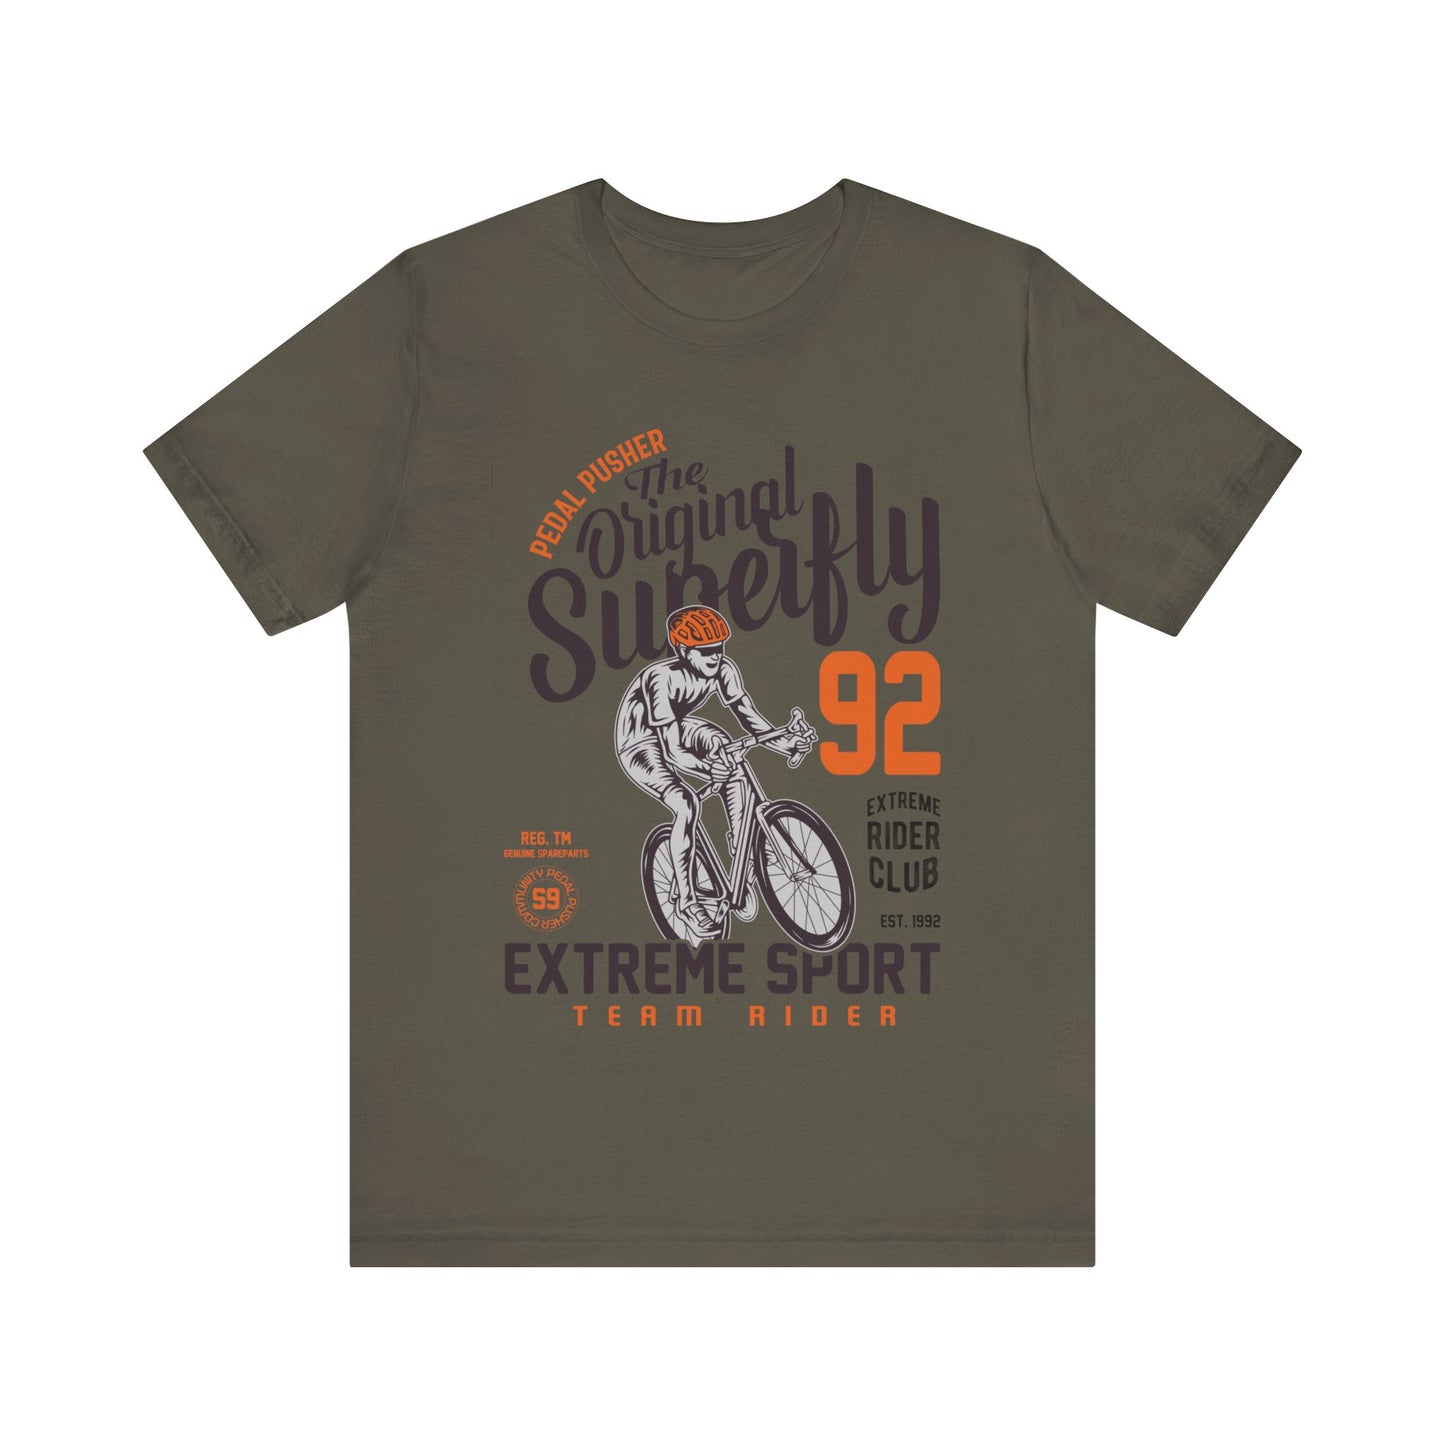 The Original Superfly - Unisex Jersey Short Sleeve Tee | US Pawn and Loan